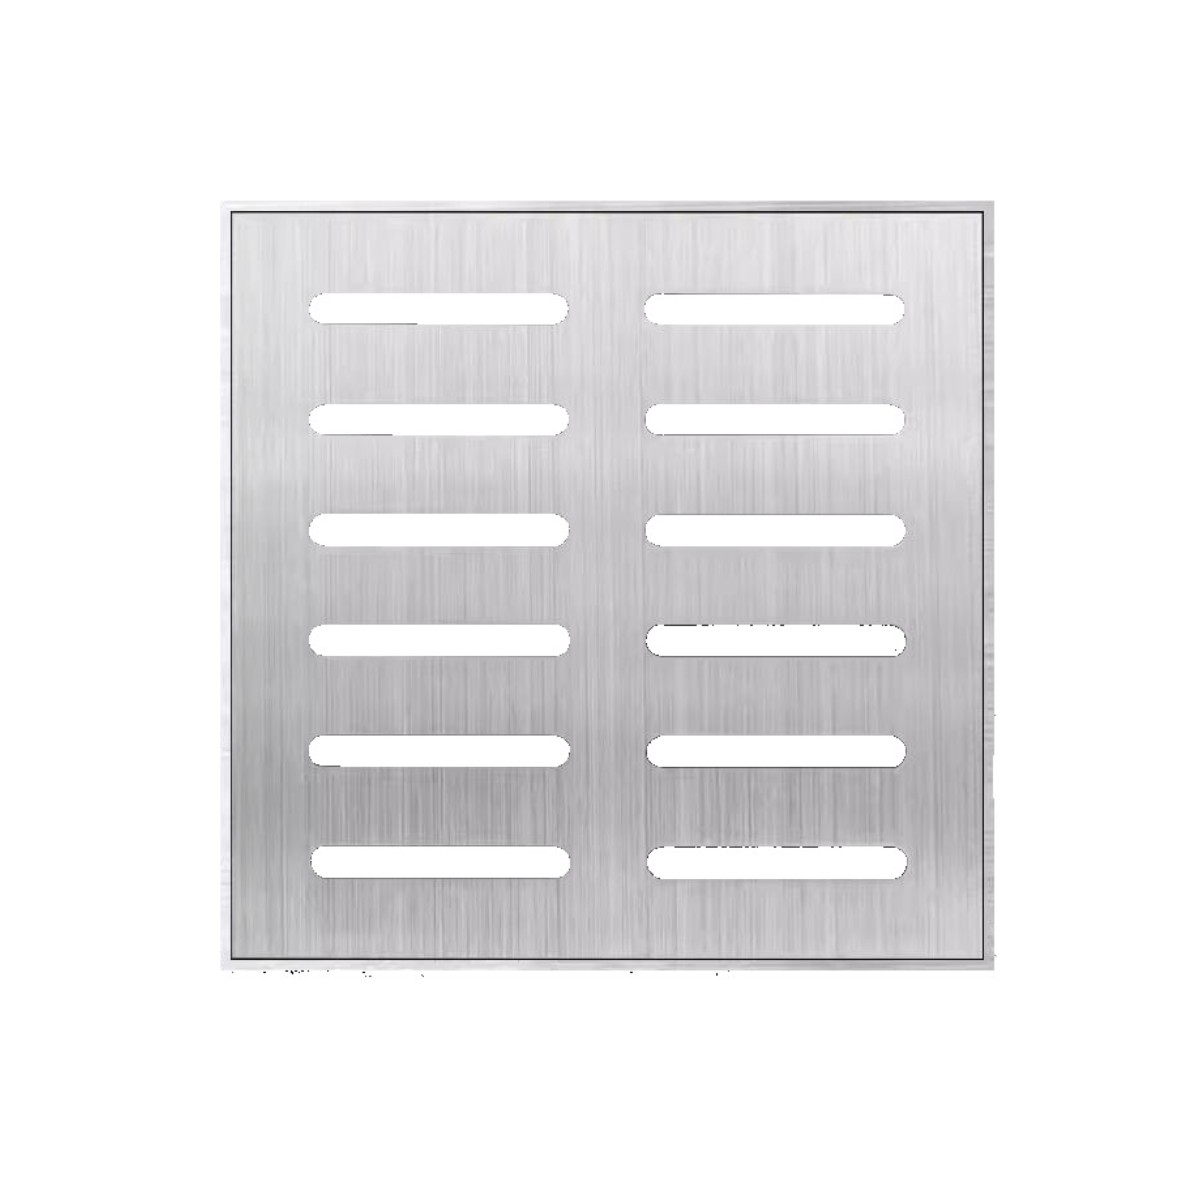 304 stainless steel rain grate Gutter cover plate Floor drain with frame Stainless steel manhole cover